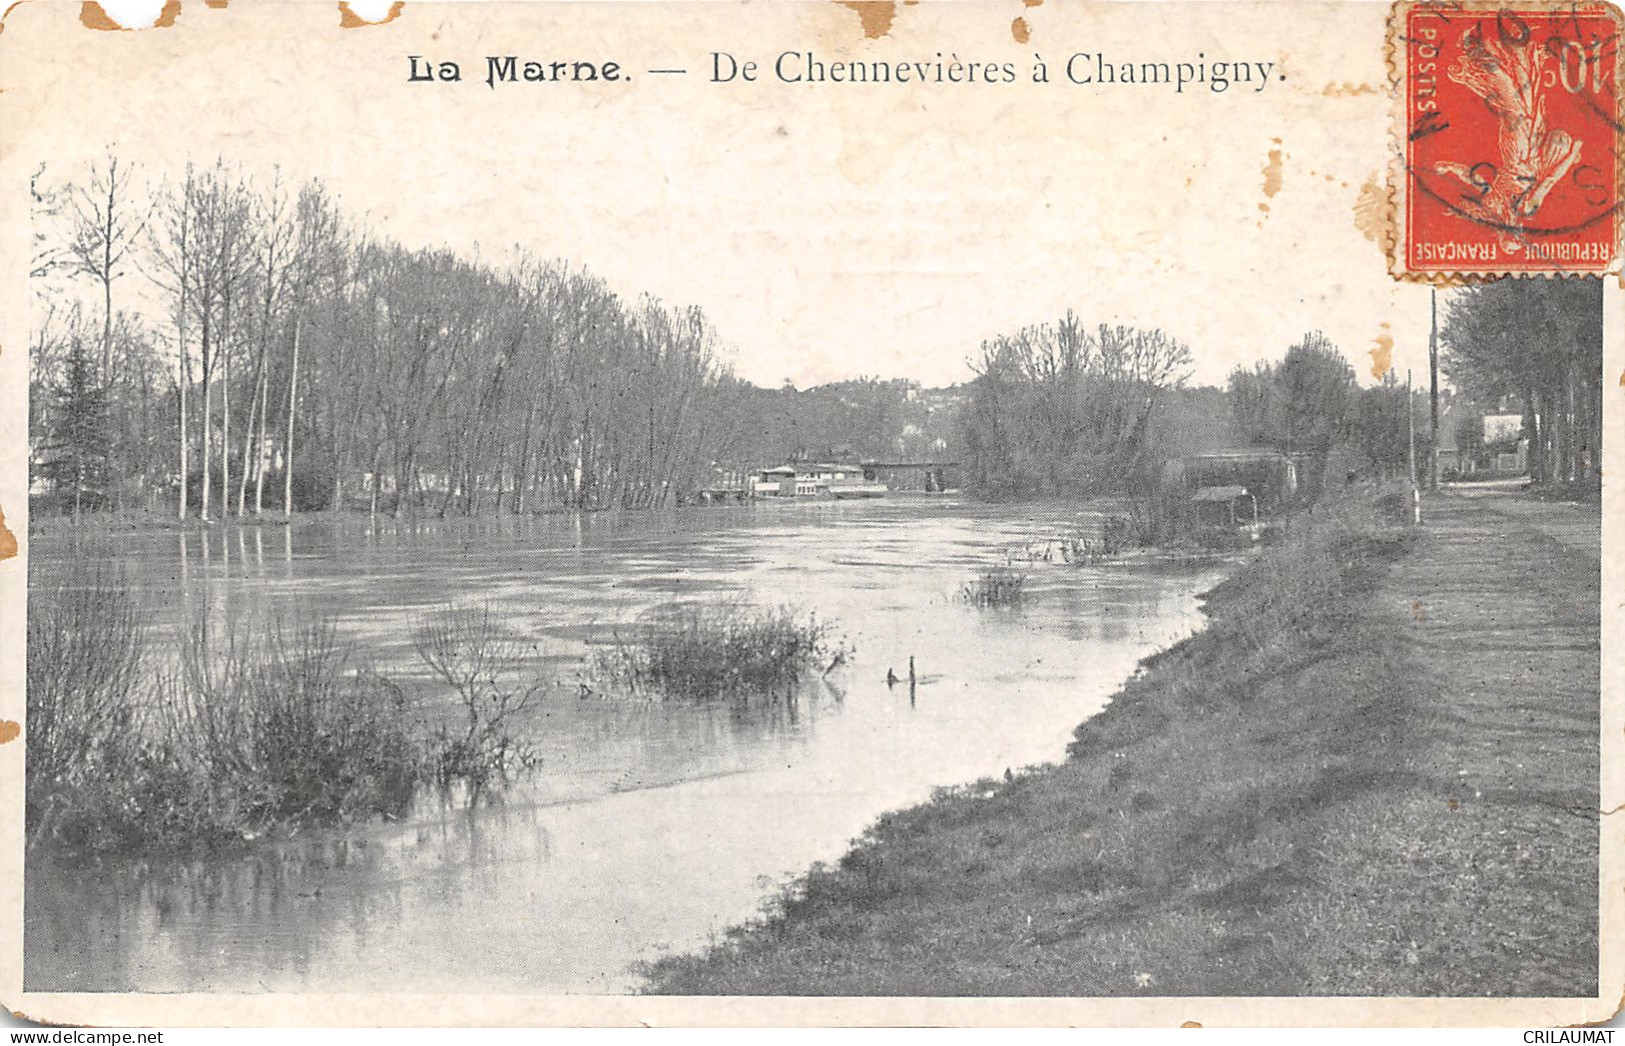 94-CHENNEVIERES-LA MARNE-N°6025-H/0235 - Chennevieres Sur Marne